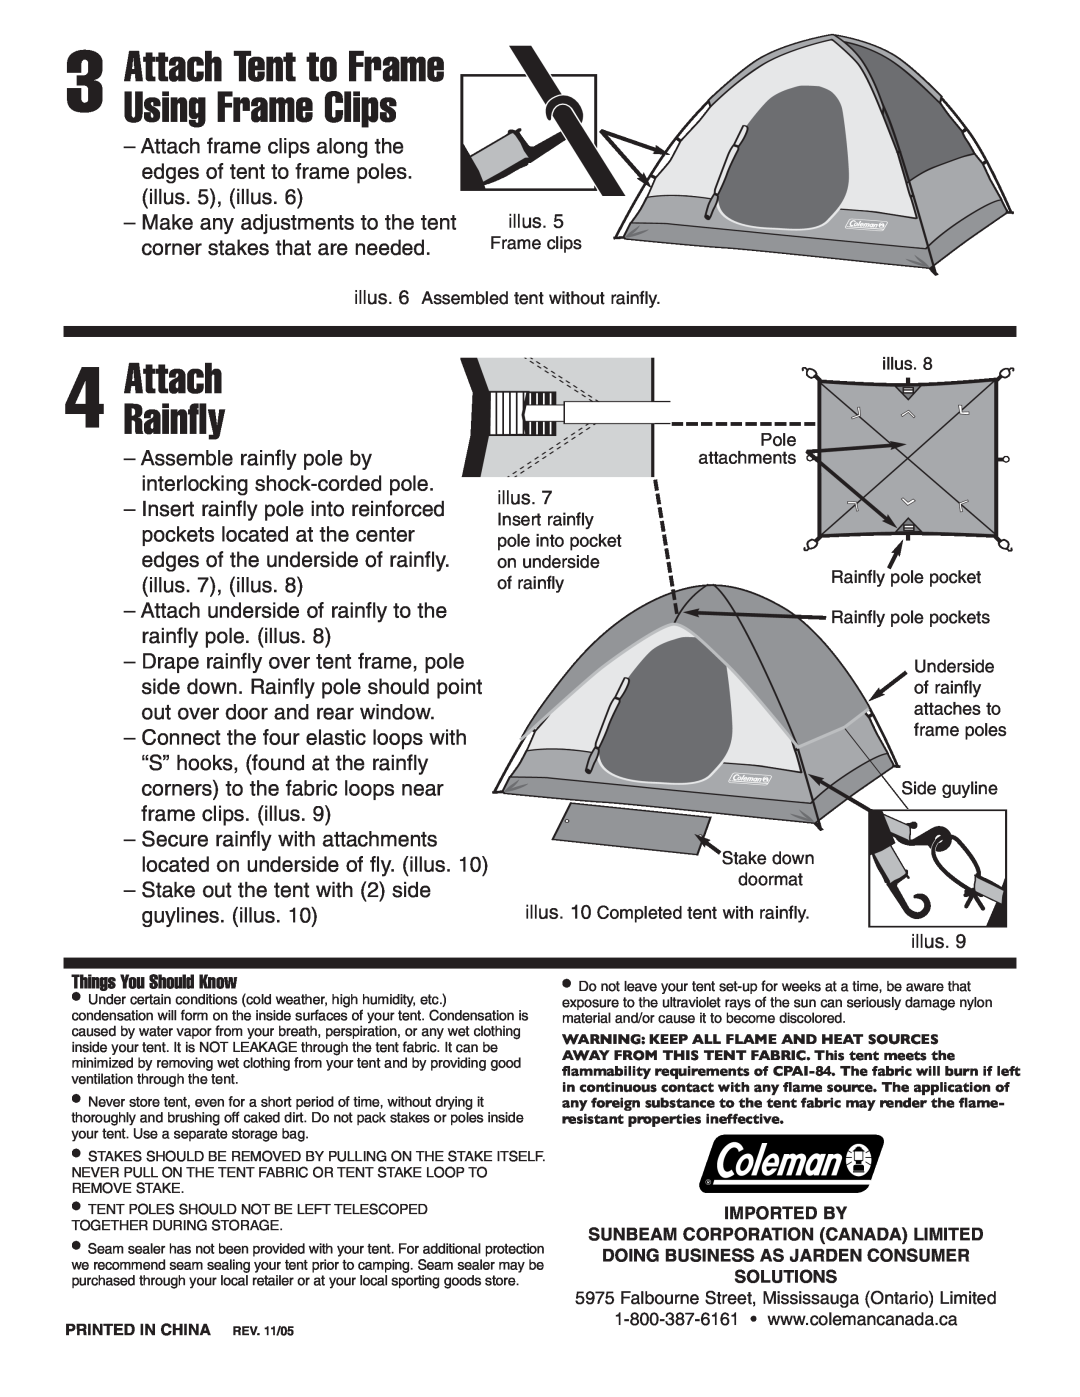 Coleman 9270-121C manual AttachRainfly, Attach Tent to Frame Using Frame Clips 